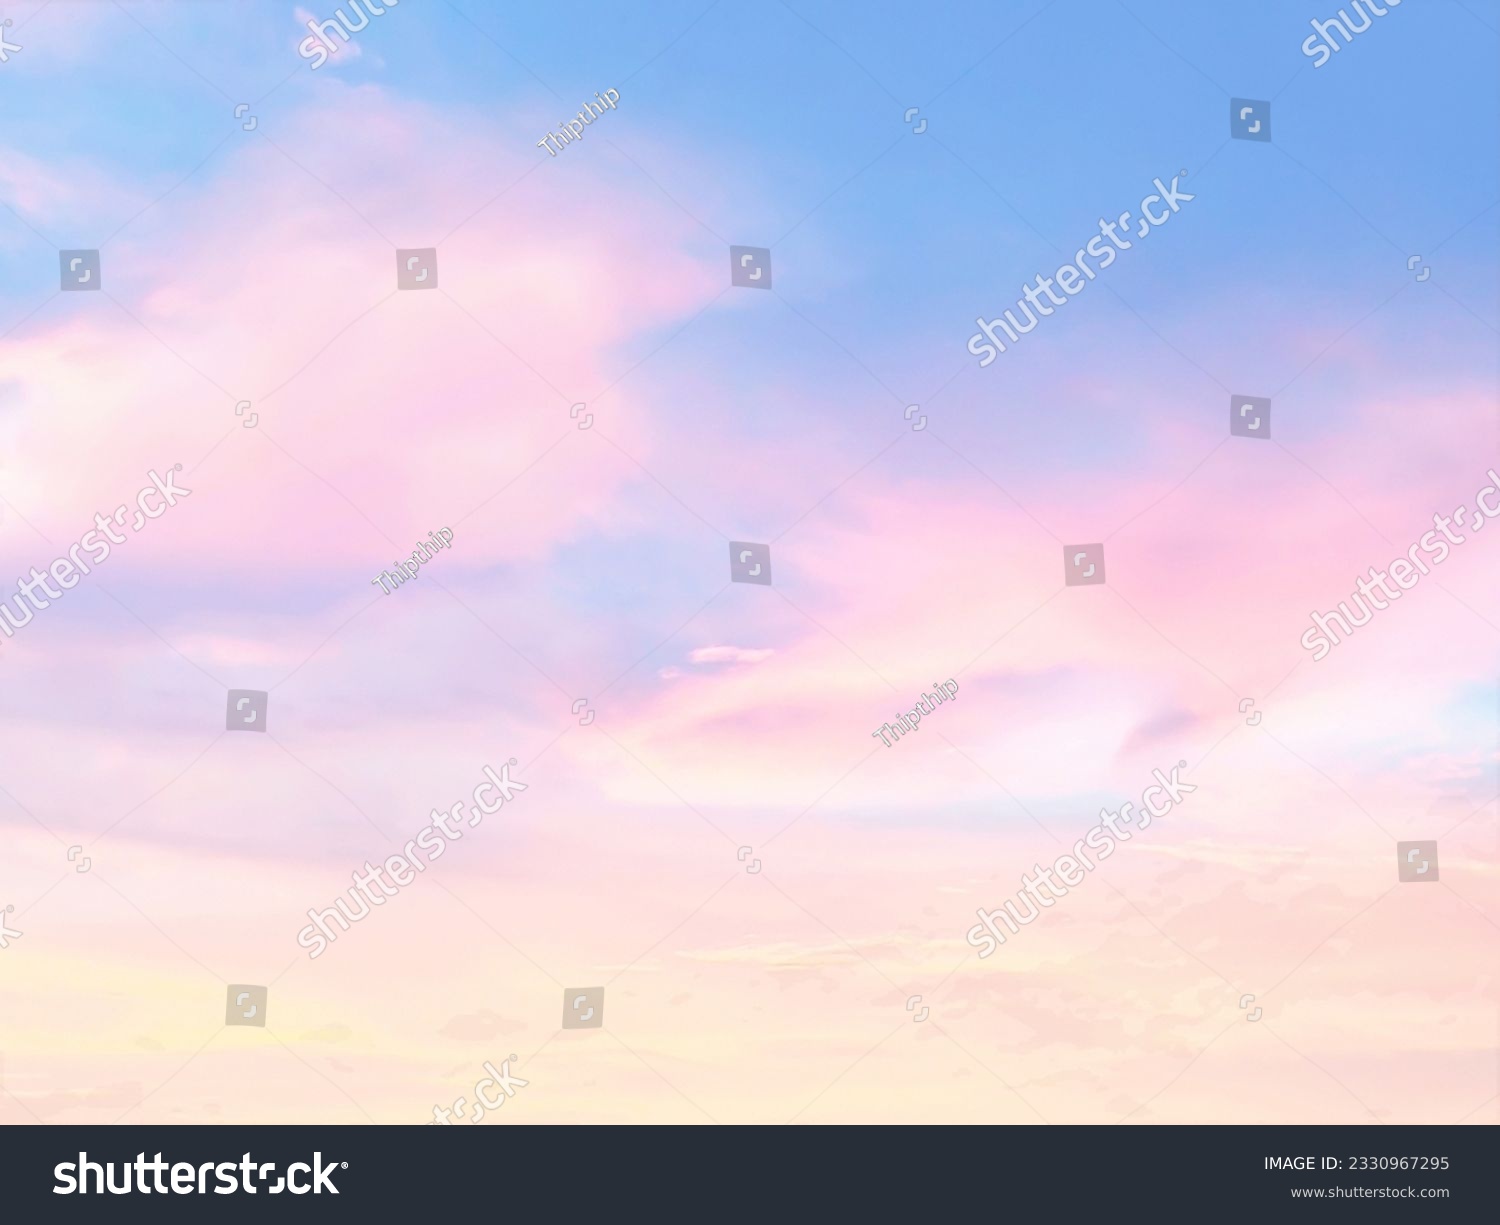 Sunset sky in the morning with sunrise and soft pink clouds with yellow tones. #2330967295